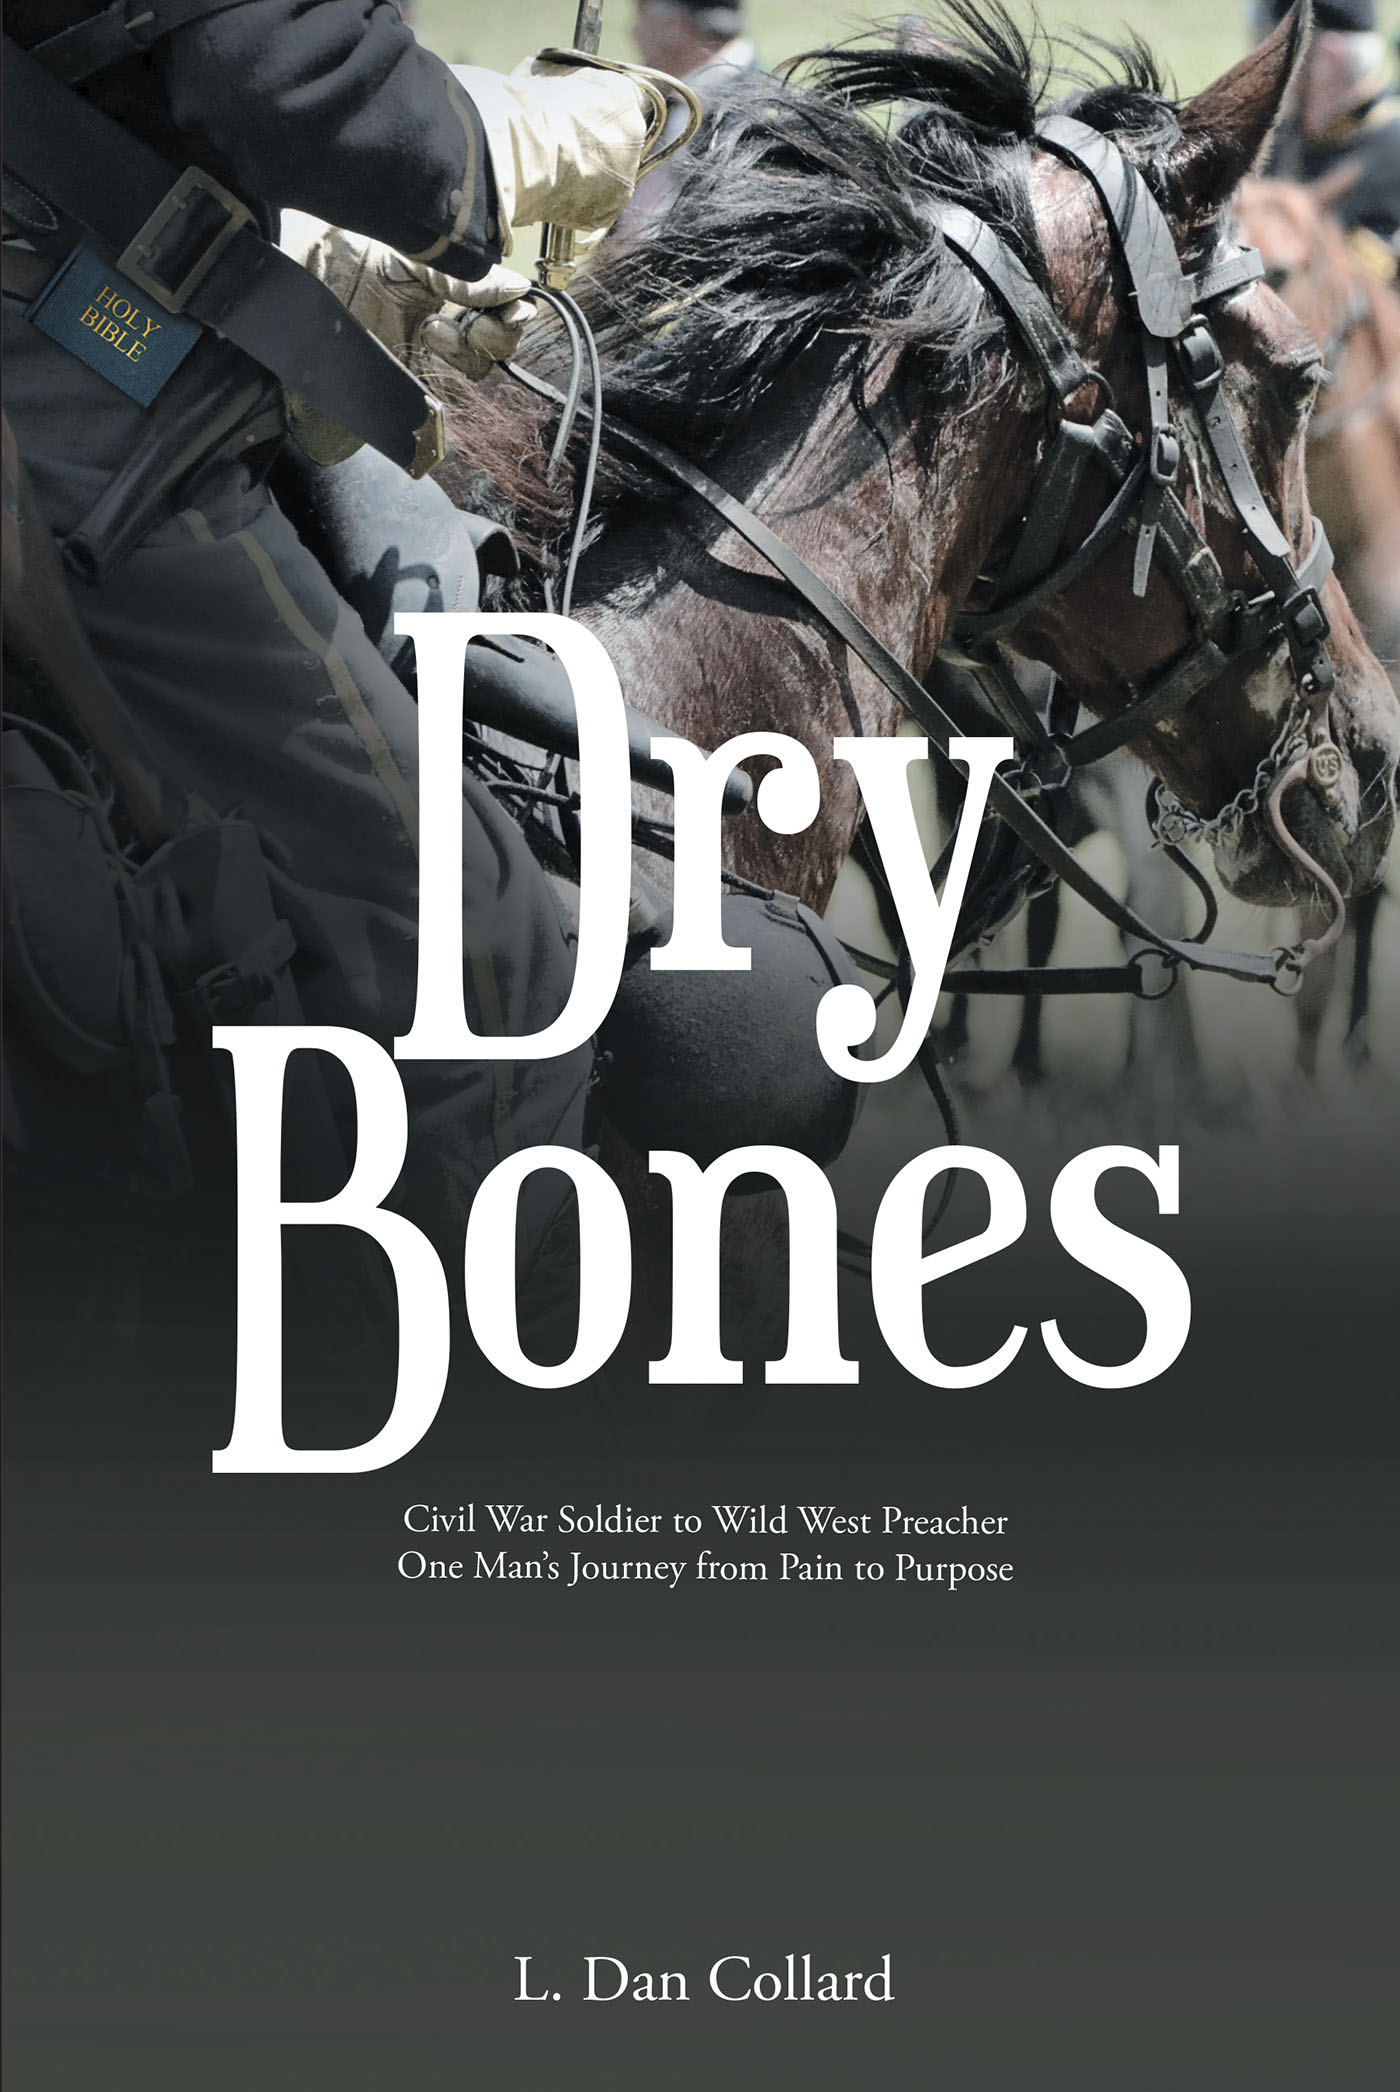 L. Dan Collard’s Newly Released "Dry Bones: Civil War Soldier to Wild West Preacher One Man’s Journey from Pain to Purpose" is a Spiritually Charged, Wild West Adventure